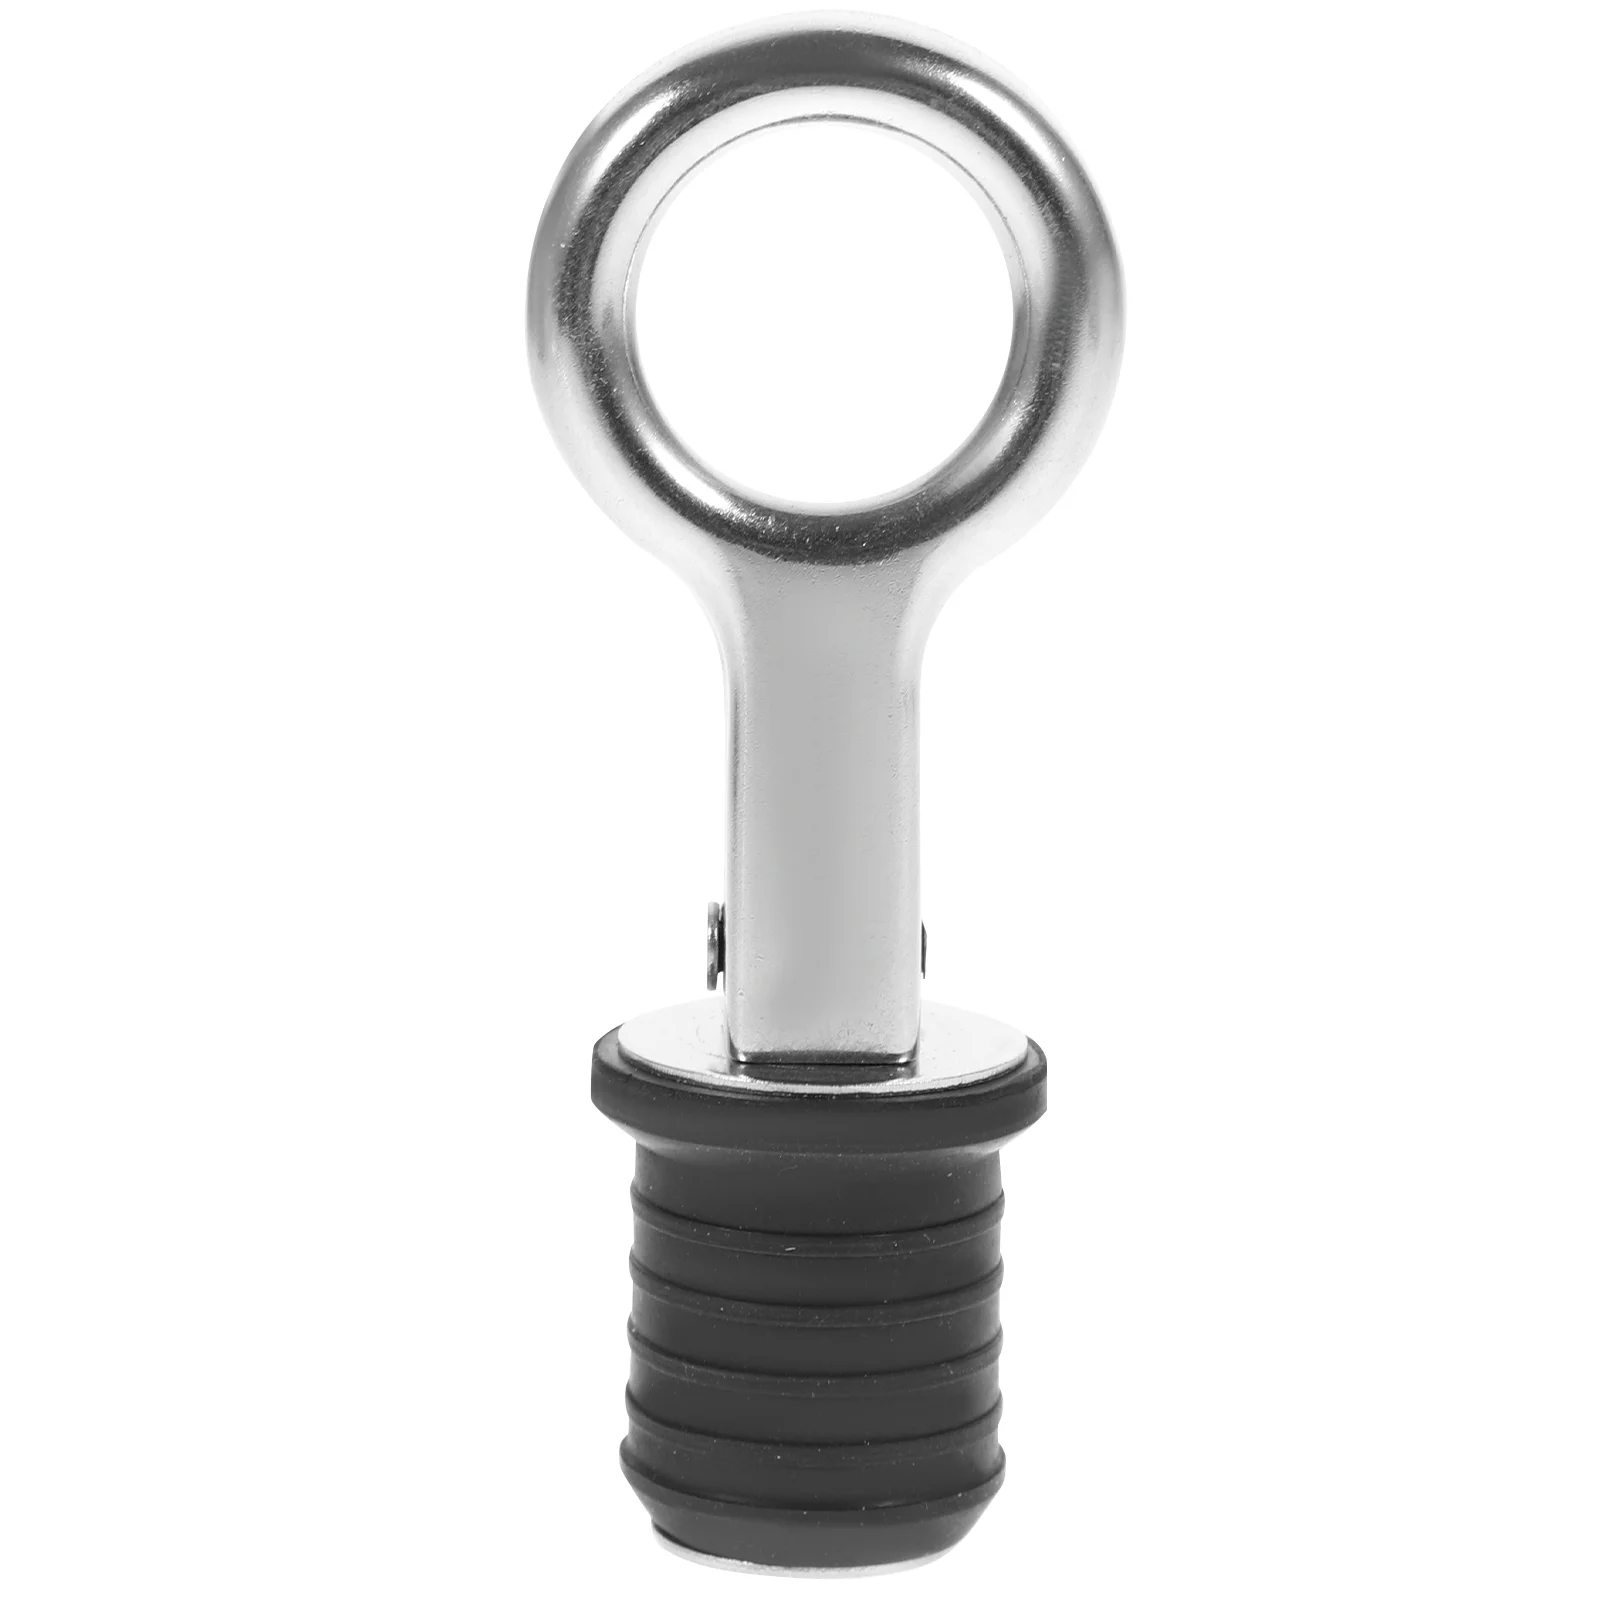 

Boat Drain Plug Kayak Accessory Professional Snap Household Stopper Anti-leak Stainless Steel Supply